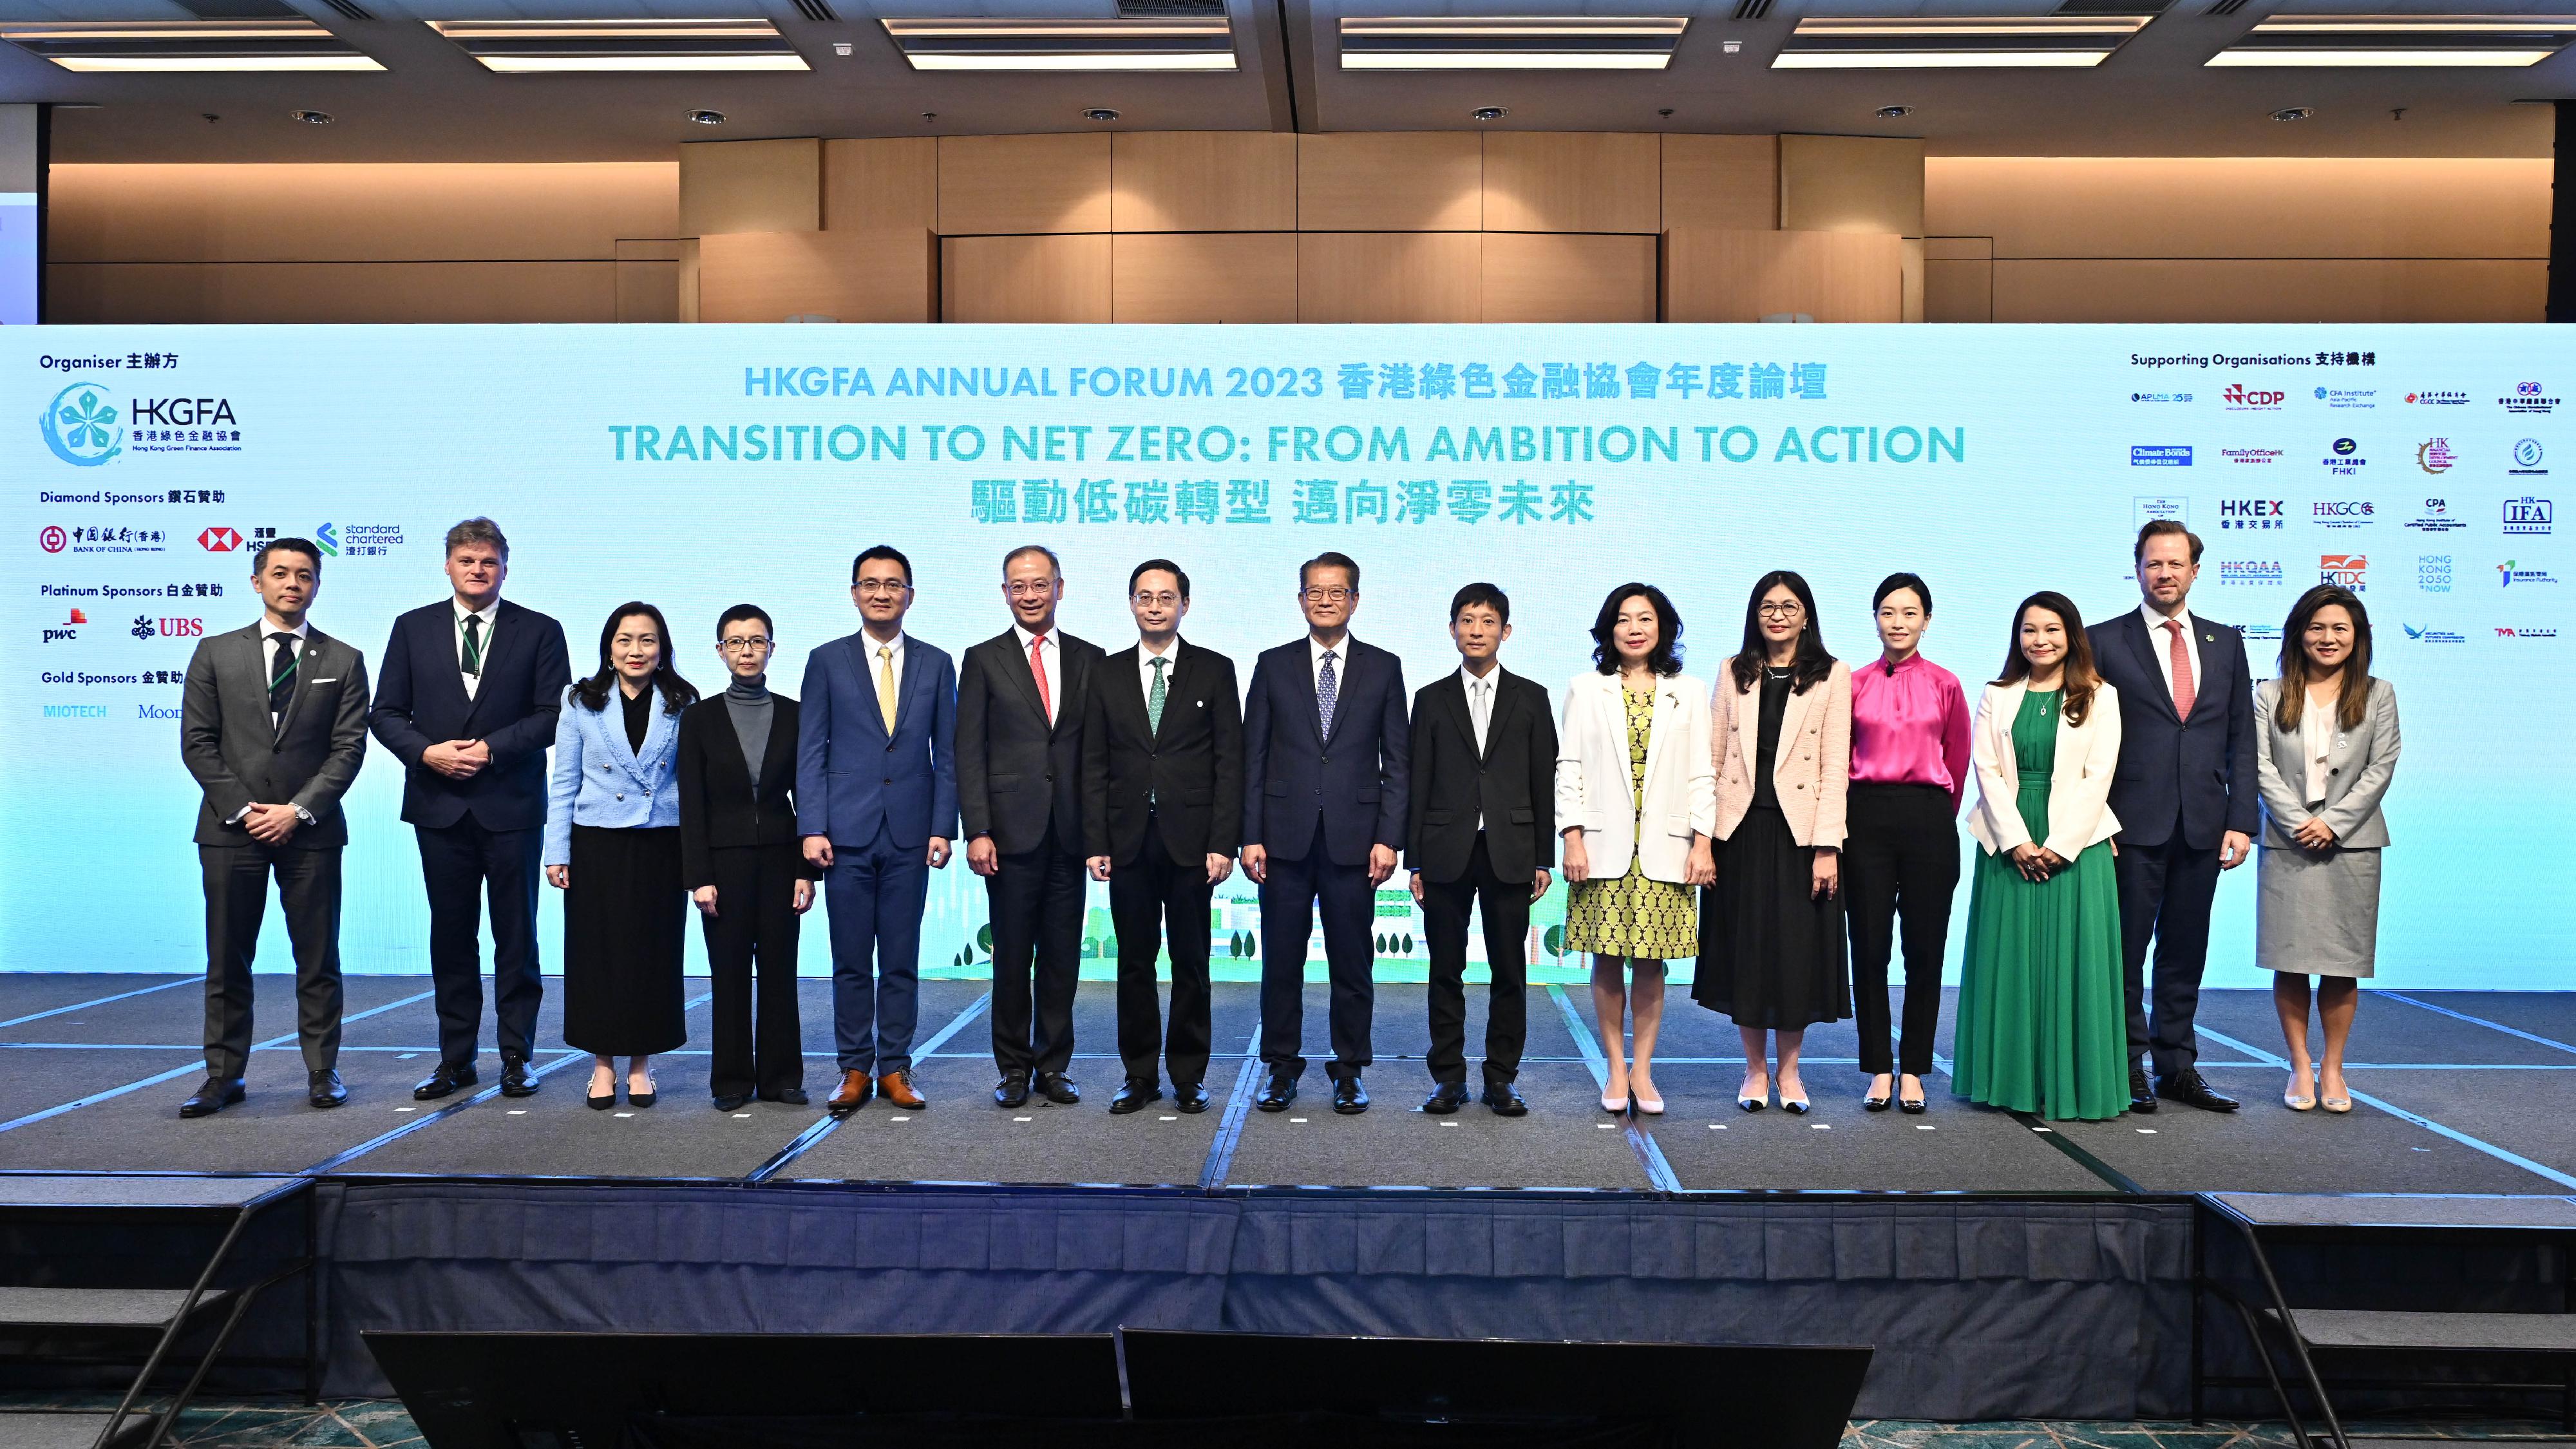 The Financial Secretary, Mr Paul Chan, attended the Hong Kong Green Finance Association (HKGFA) Annual Forum 2023 today (October 4). Photo shows Mr Chan (eighth left); the Deputy Director-General of the Department of Economic Affairs of the Liaison Office of the Central People's Government in the Hong Kong Special Administrative Region, Mr Tan Yabo (ninth left); the Chairman and President of the HKGFA, Dr Ma Jun (seventh left), and other guests at the forum.